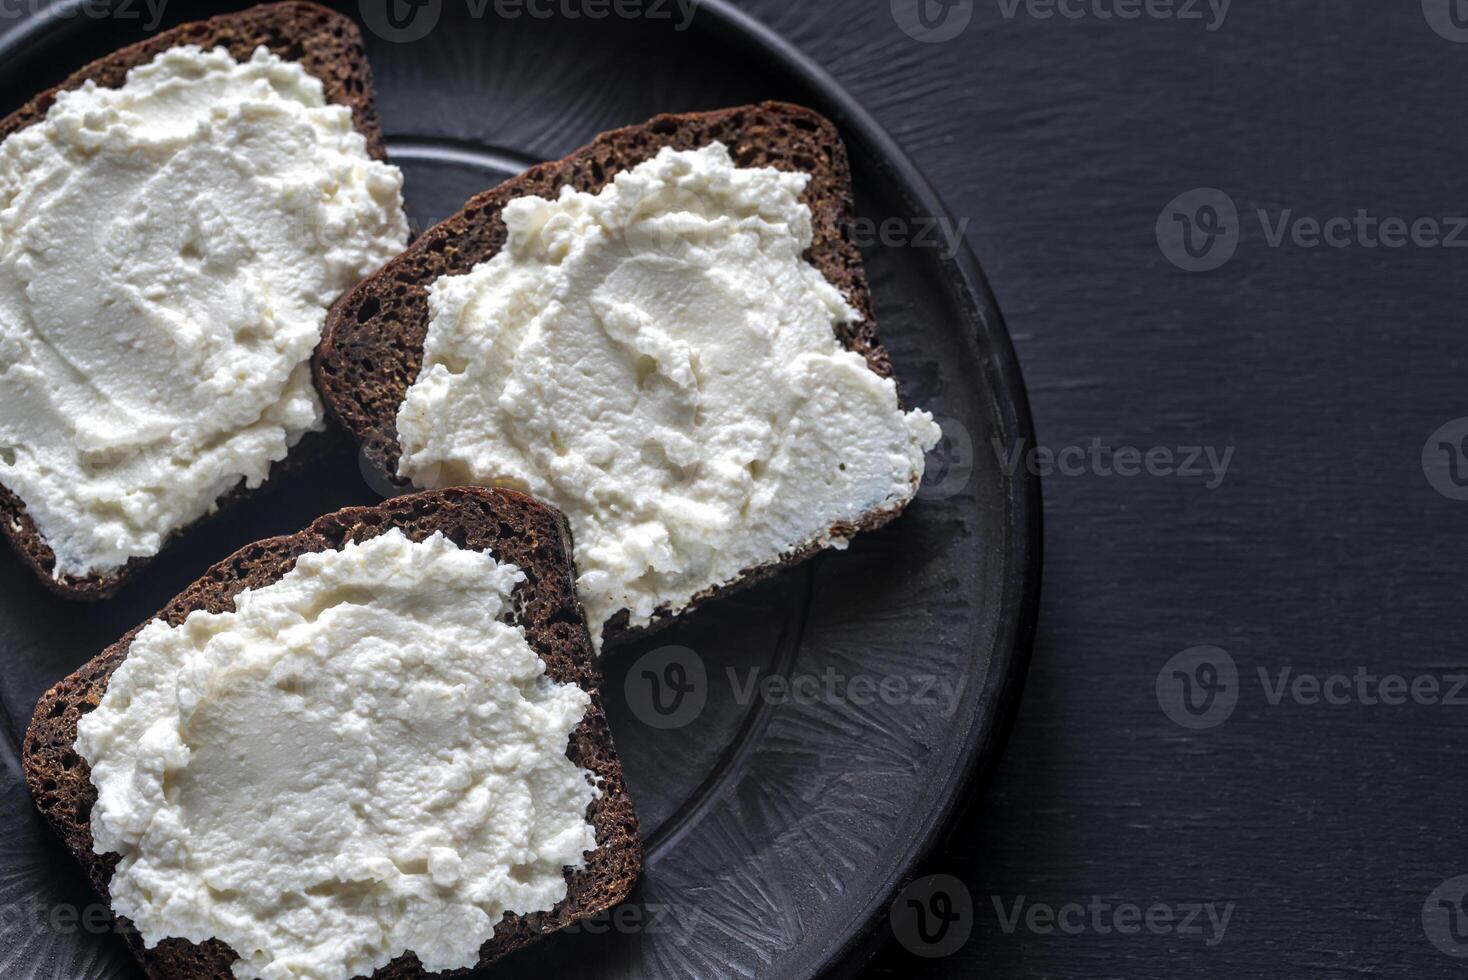 Sandwiches with cream cheese photo